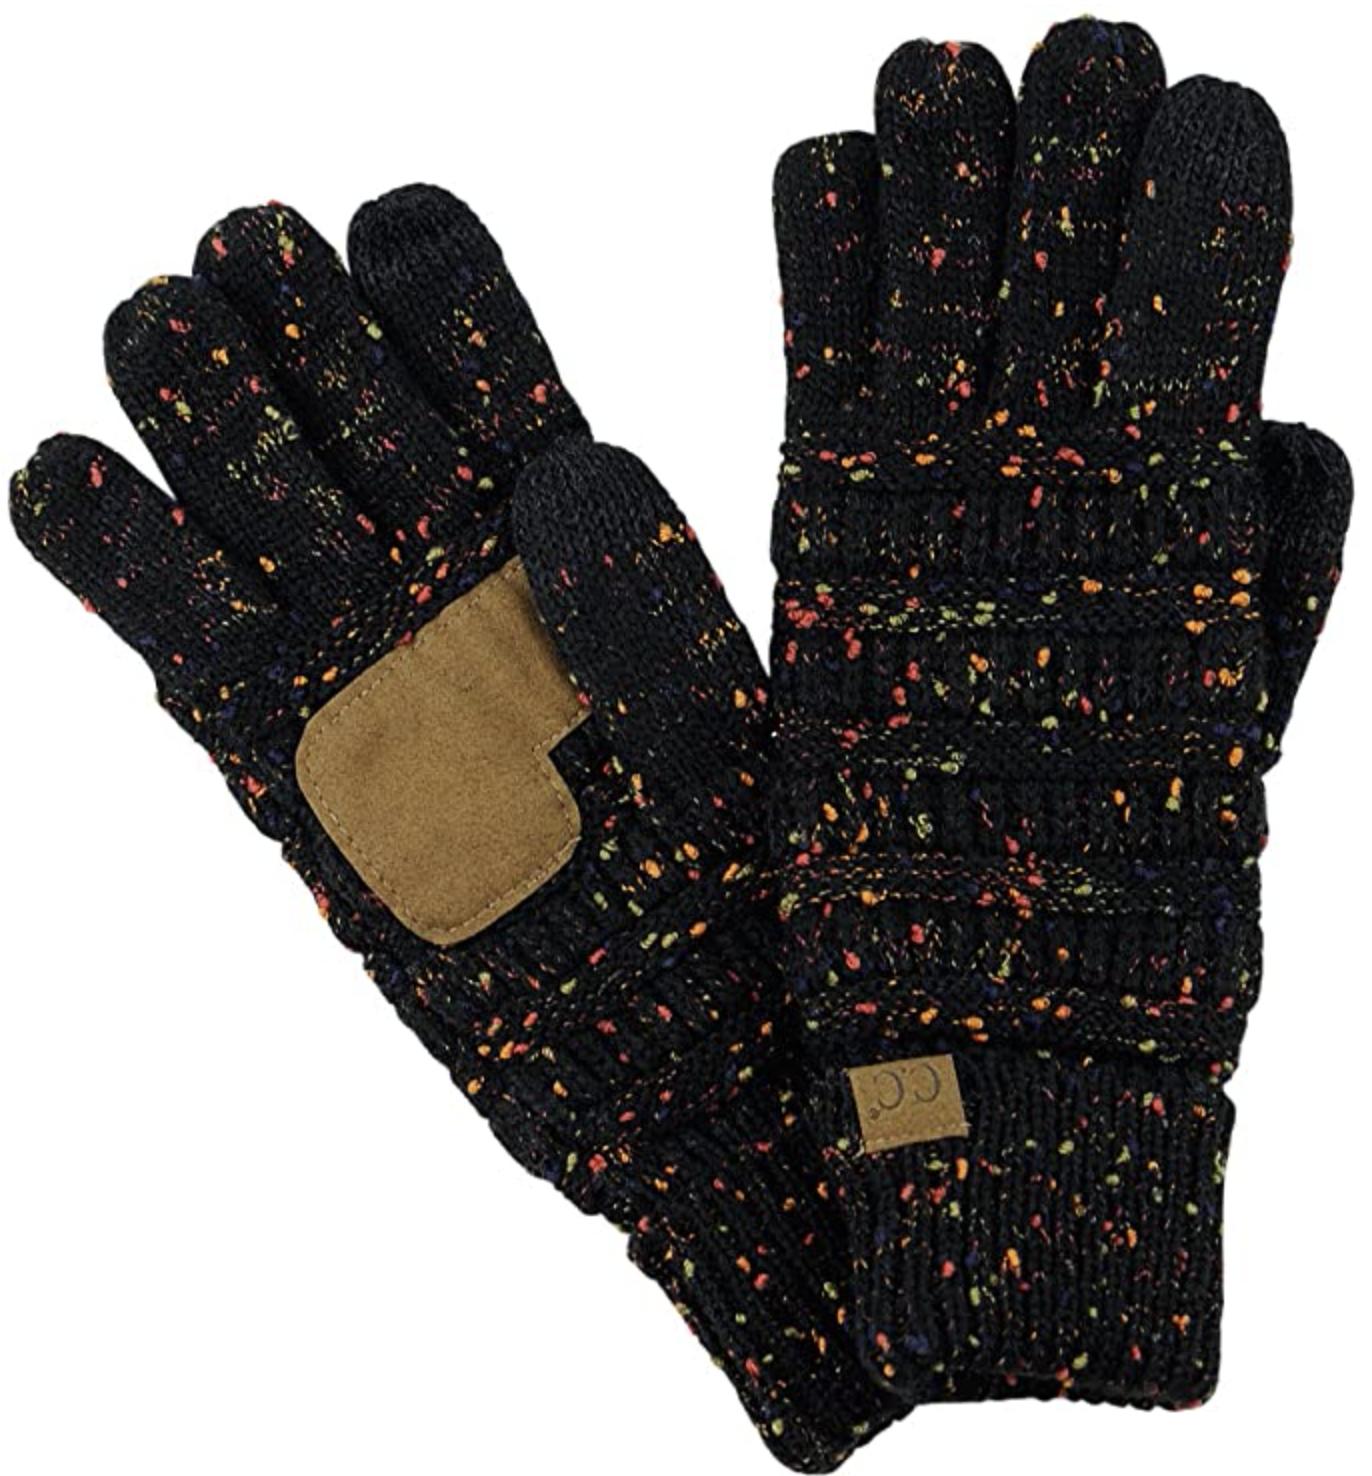 Cc Unisex Cable Knit Winter Warm Touchscreen Gloves